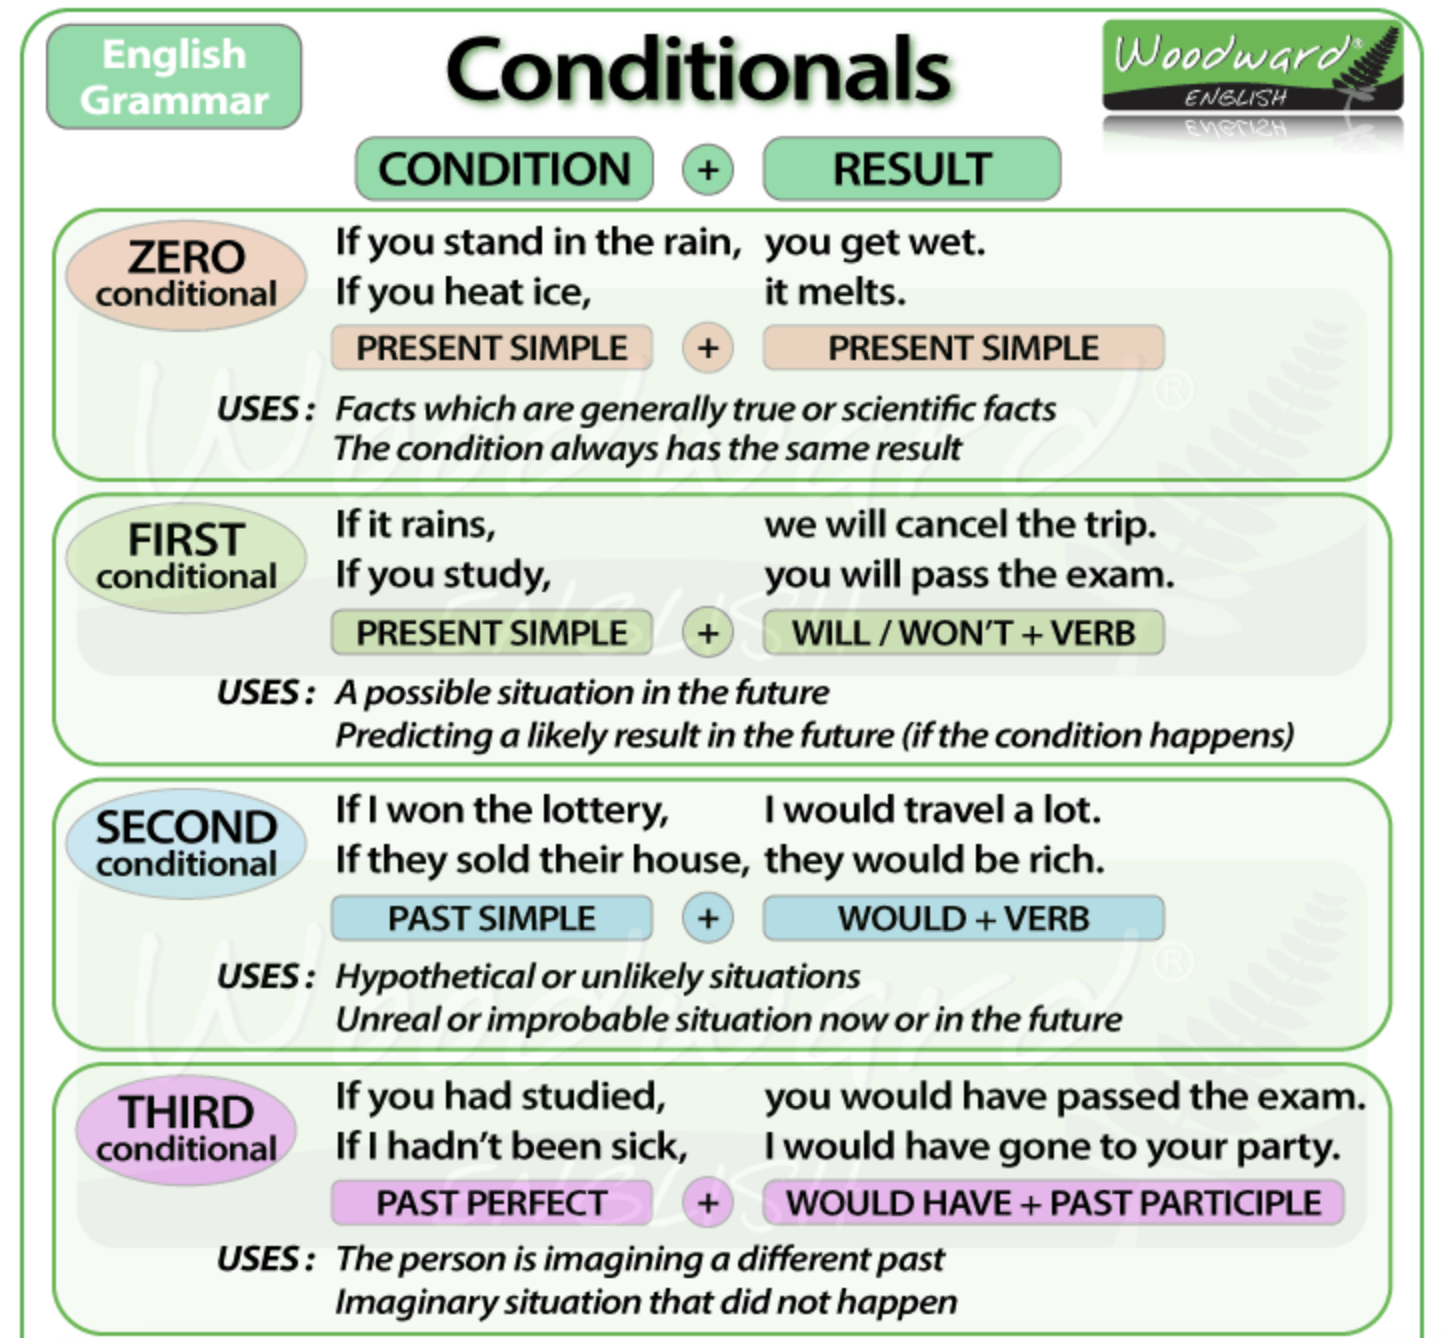 It my if you. Conditionals в английском 0 1 2. Conditionals в английском 2 3. 0-3 Conditional в английском языке. 2 Кондишинал в английском.